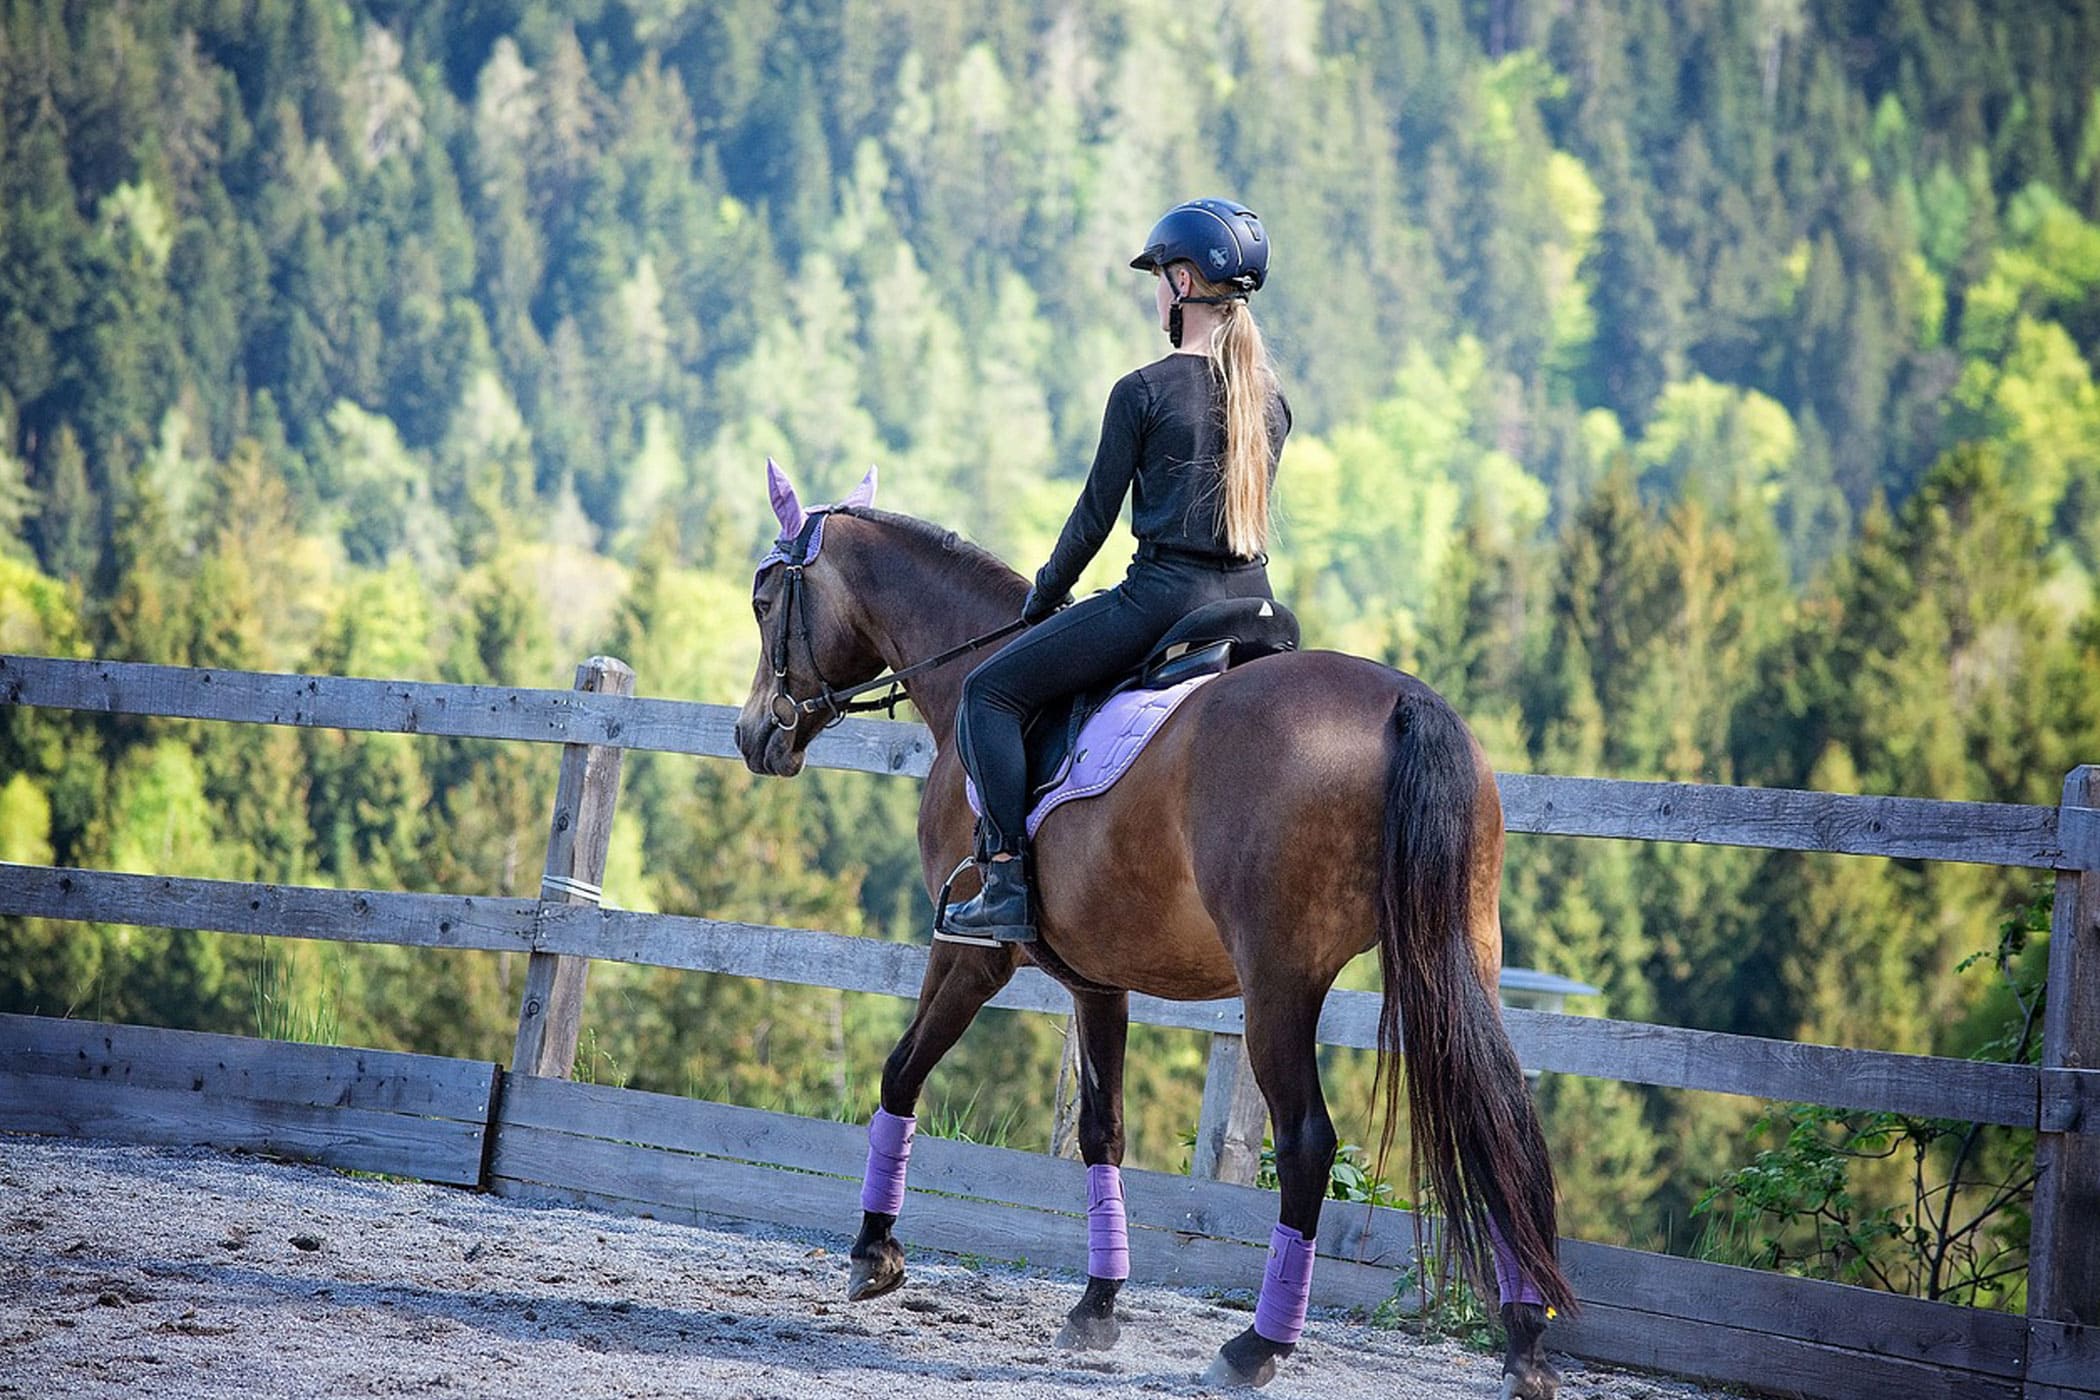 The Taylor-Made School of Horsemanship: Empowering Recovery through Equine Therapy